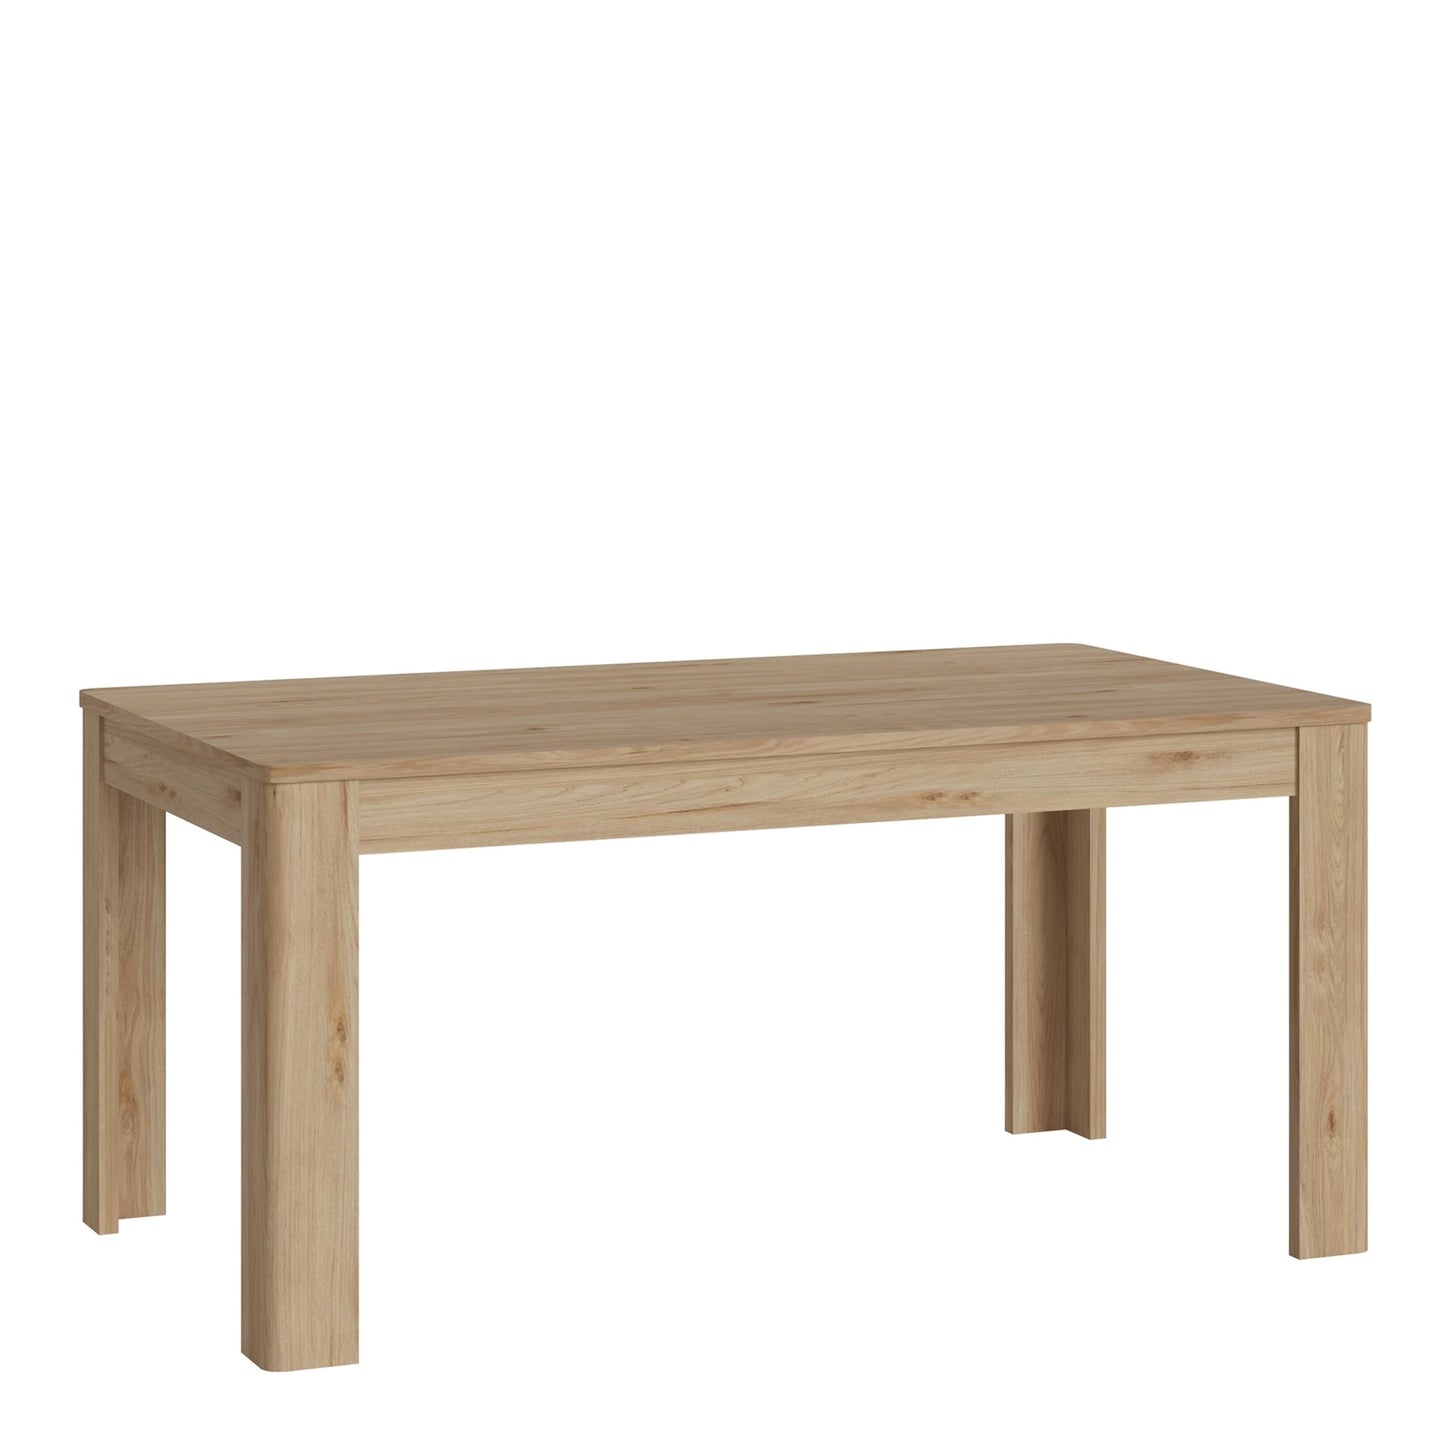 Furniture To Go Cestino Extendable Table 160-200cm in Jackson Hickory Oak Effect